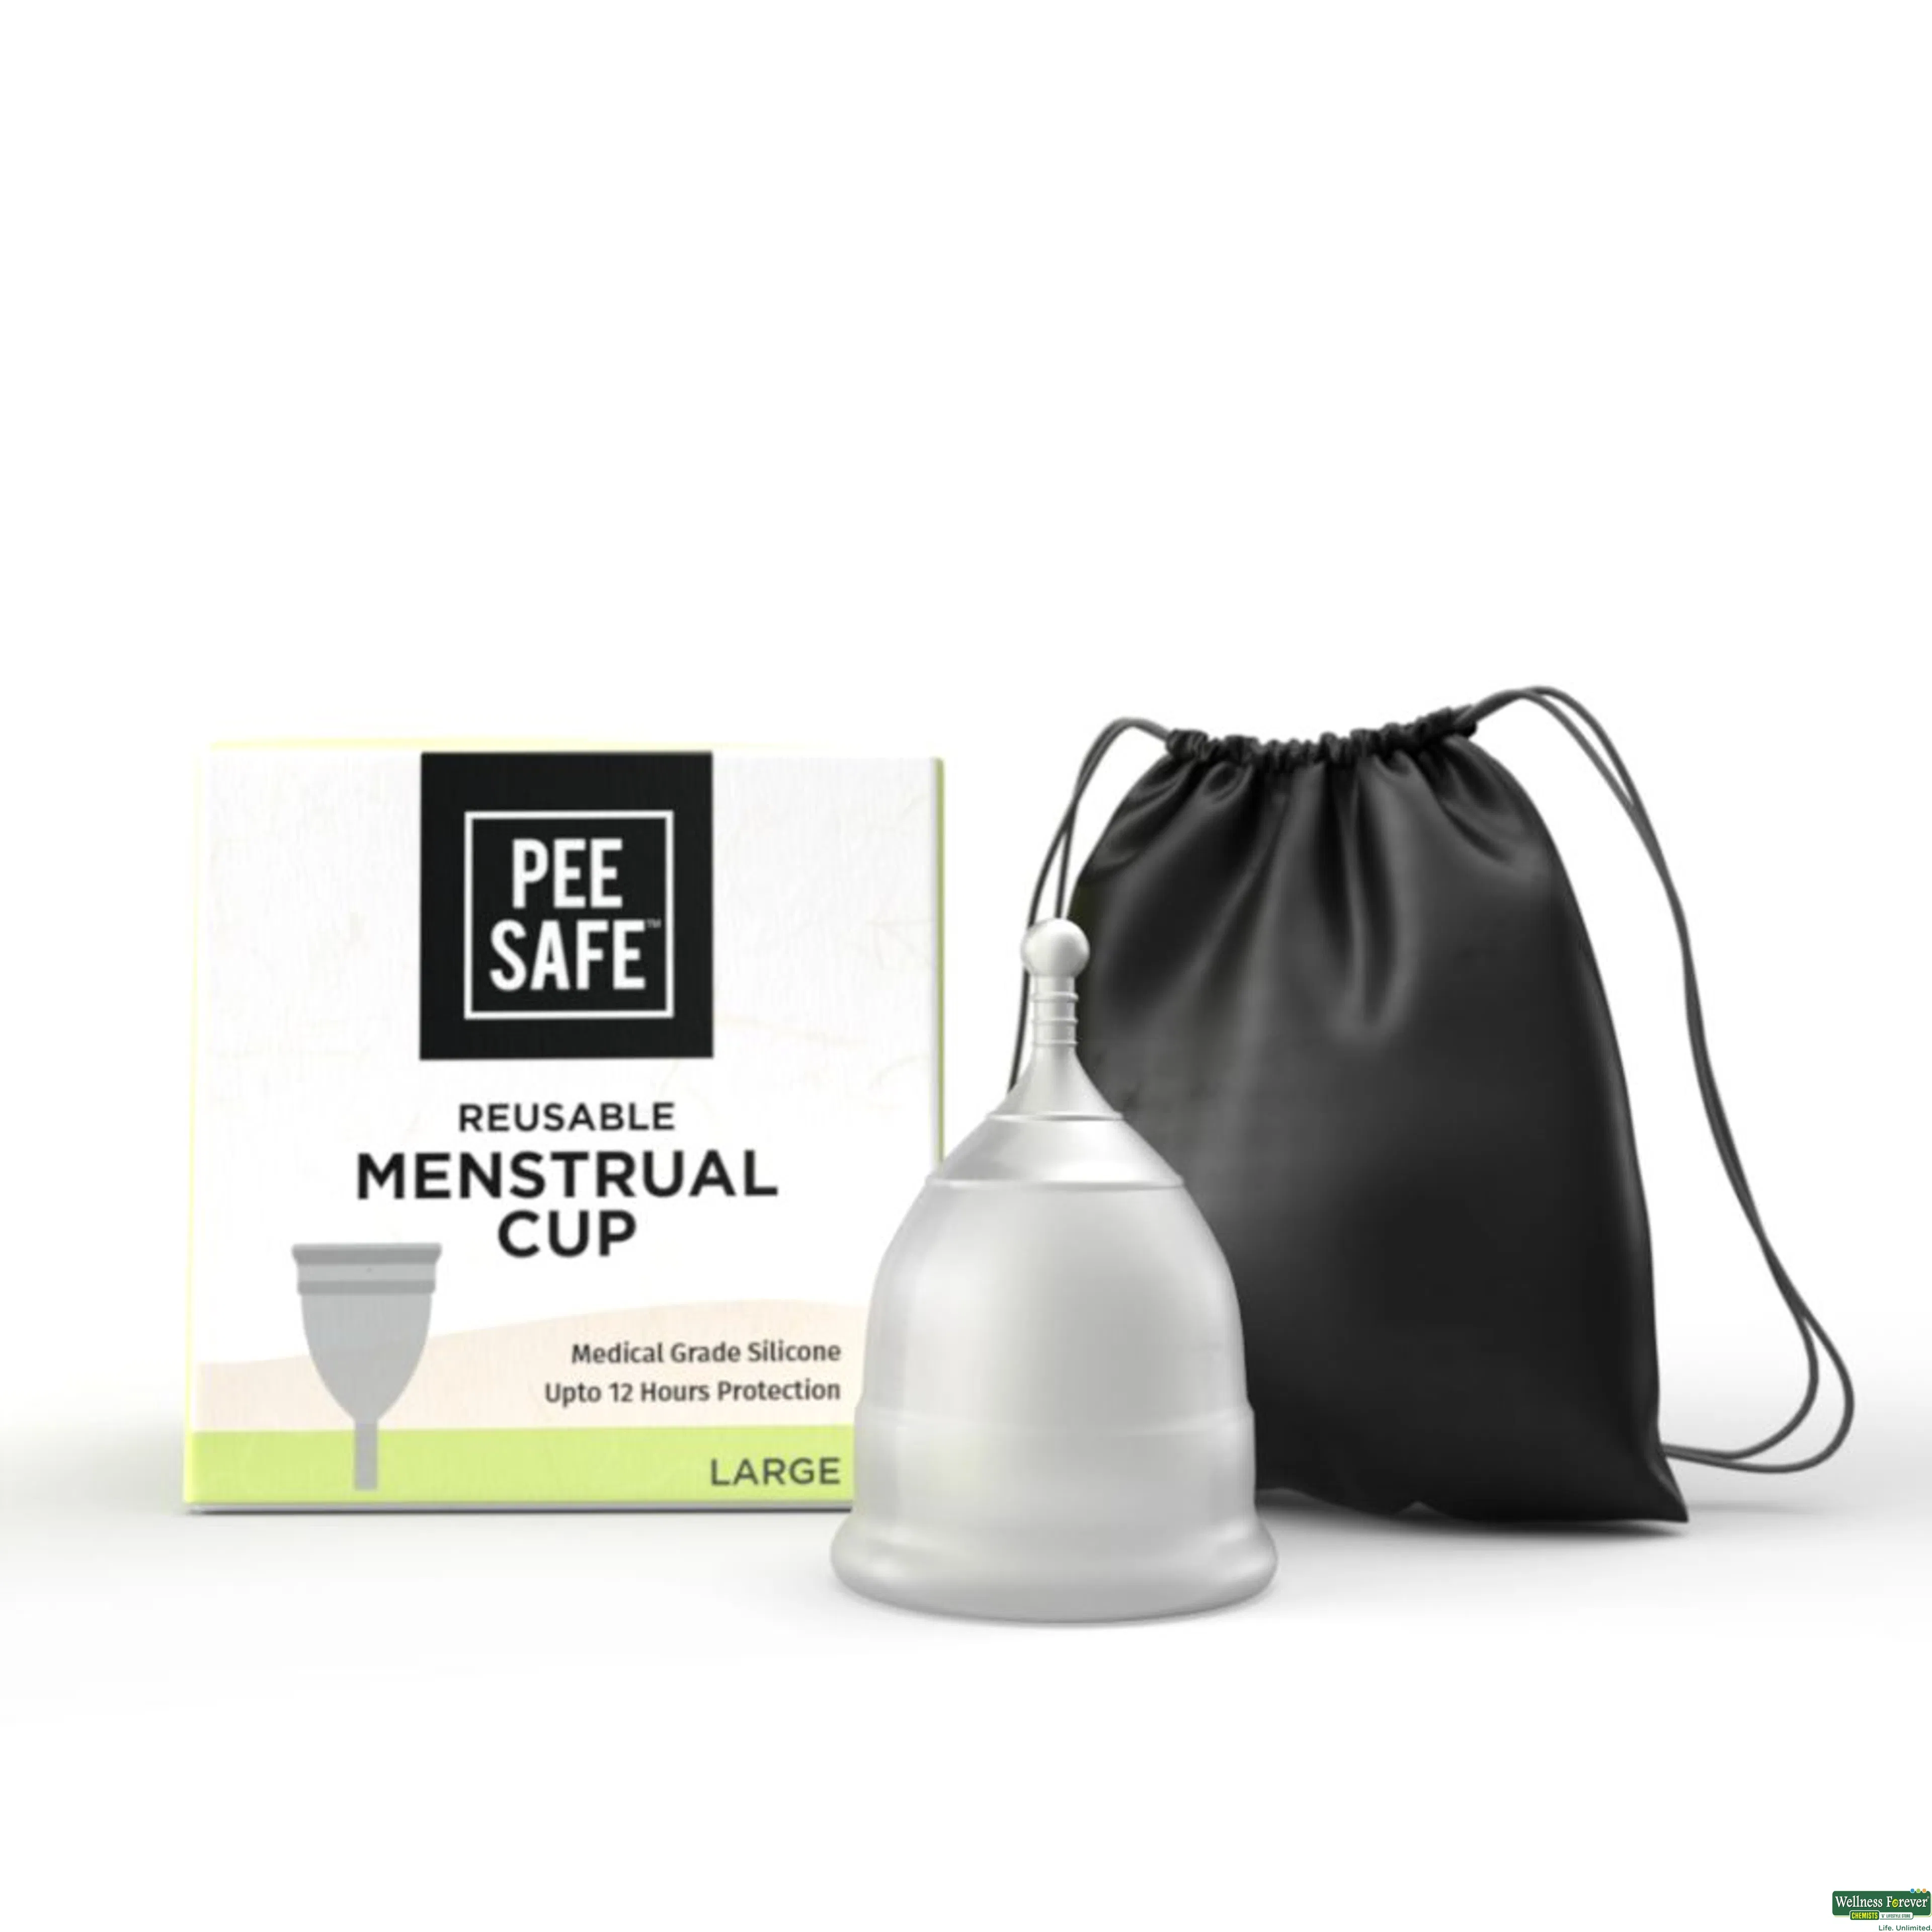 MENSTRUAL CUPS LARGE 1PC-image